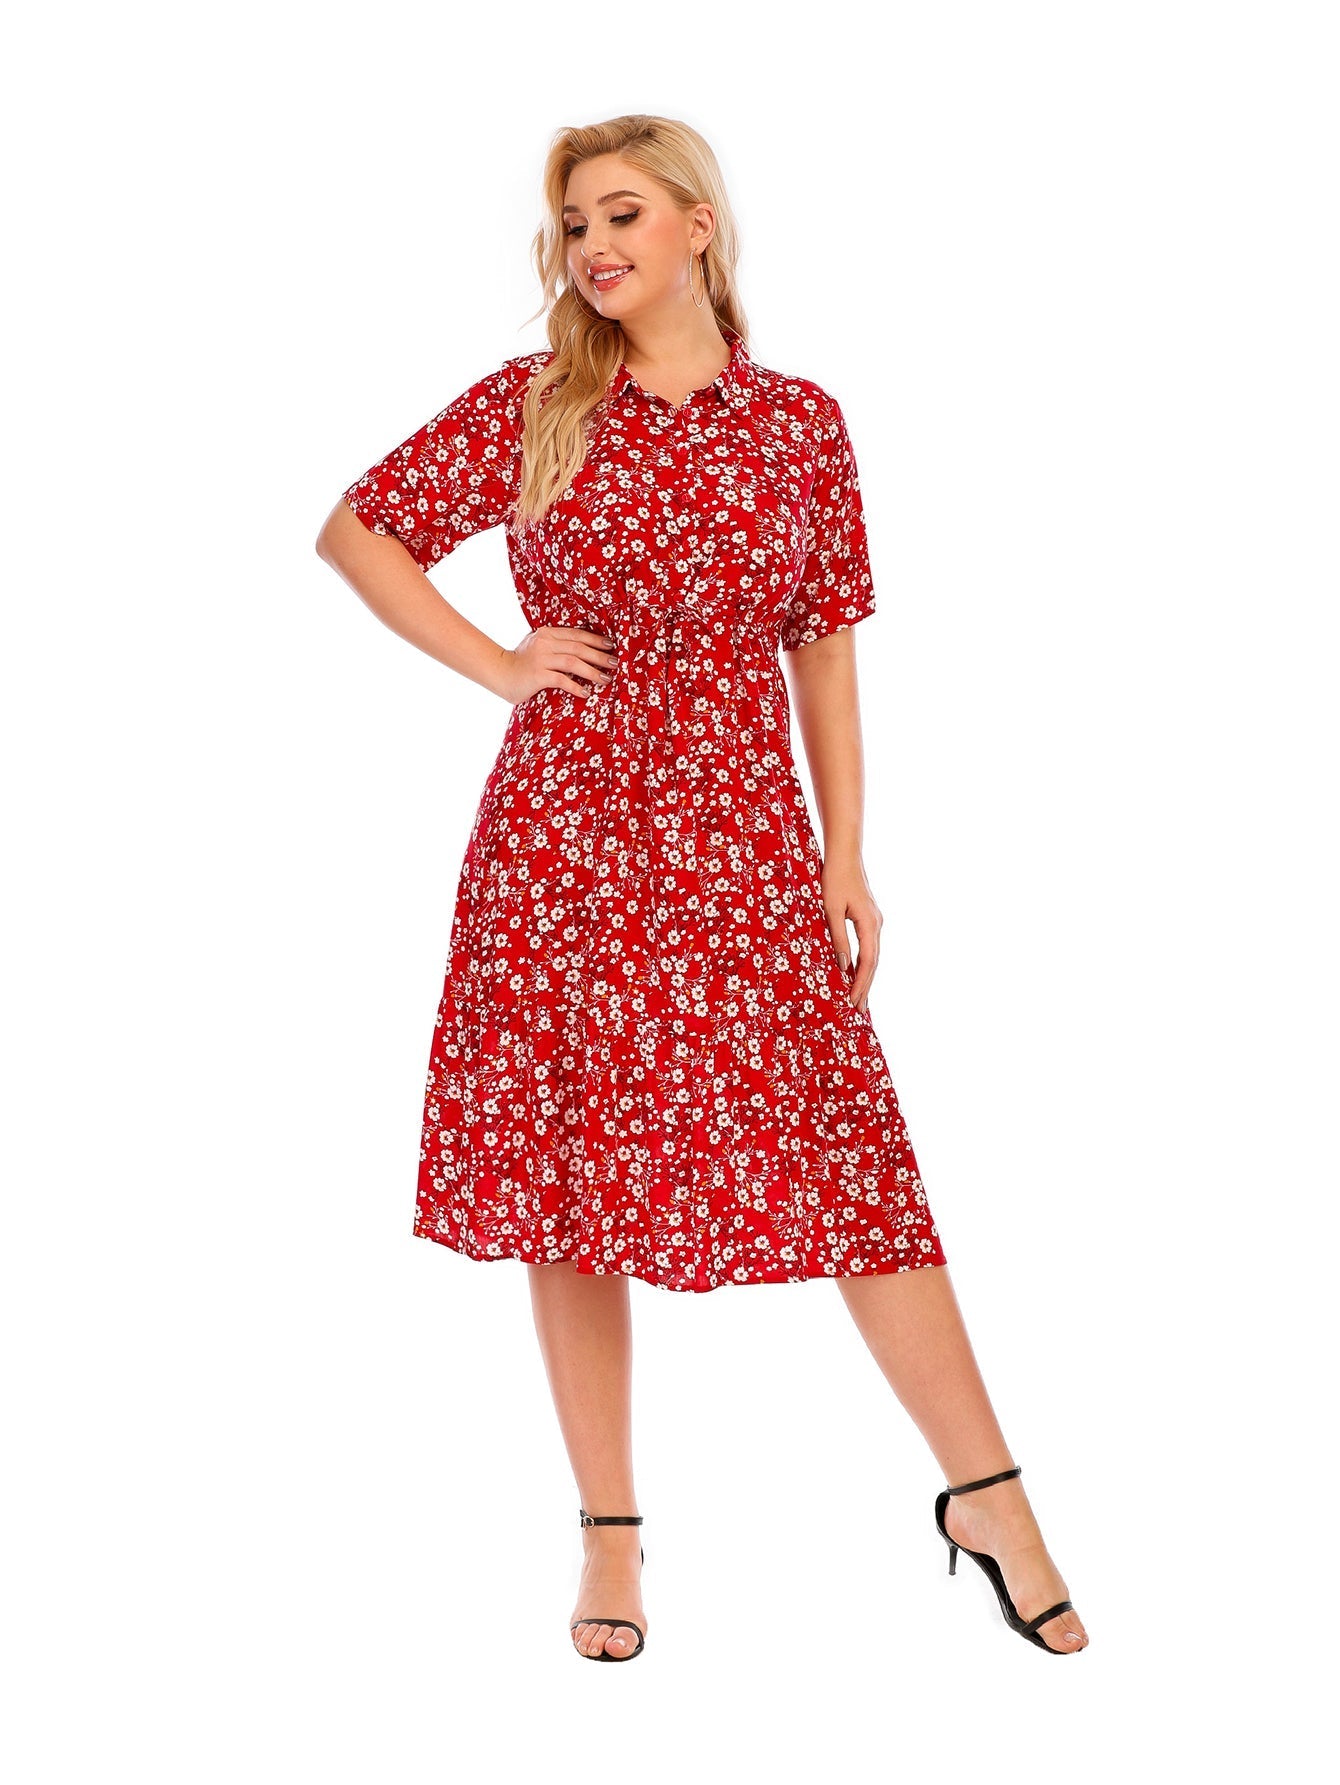 Women's Plus Size Stand Collar Floral Printed Buttoned Midi Dress Sai Feel